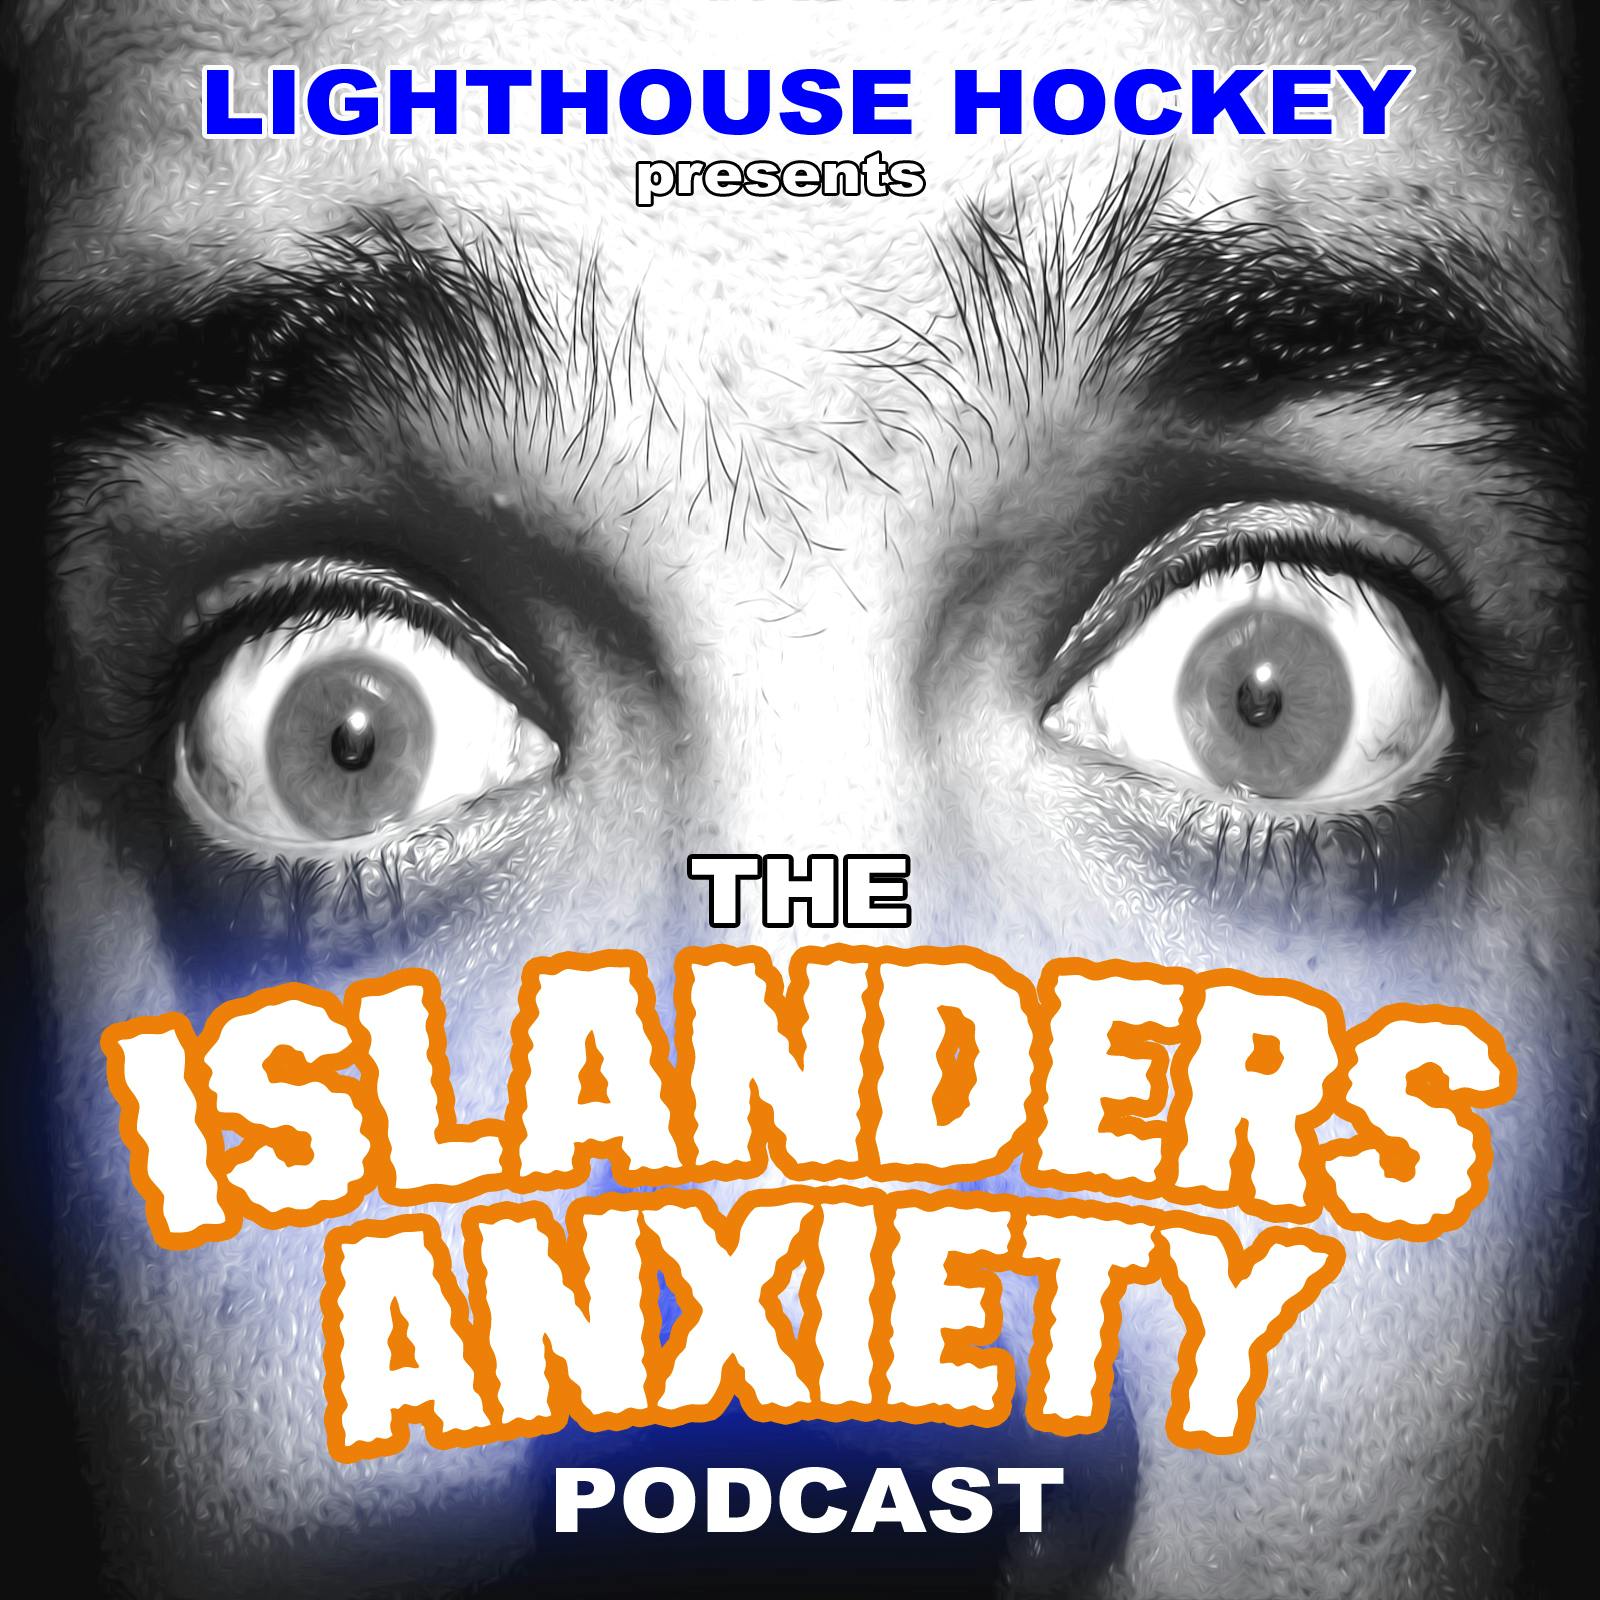 Islanders Anxiety - Episode 196 - Be Your Own Upgrade